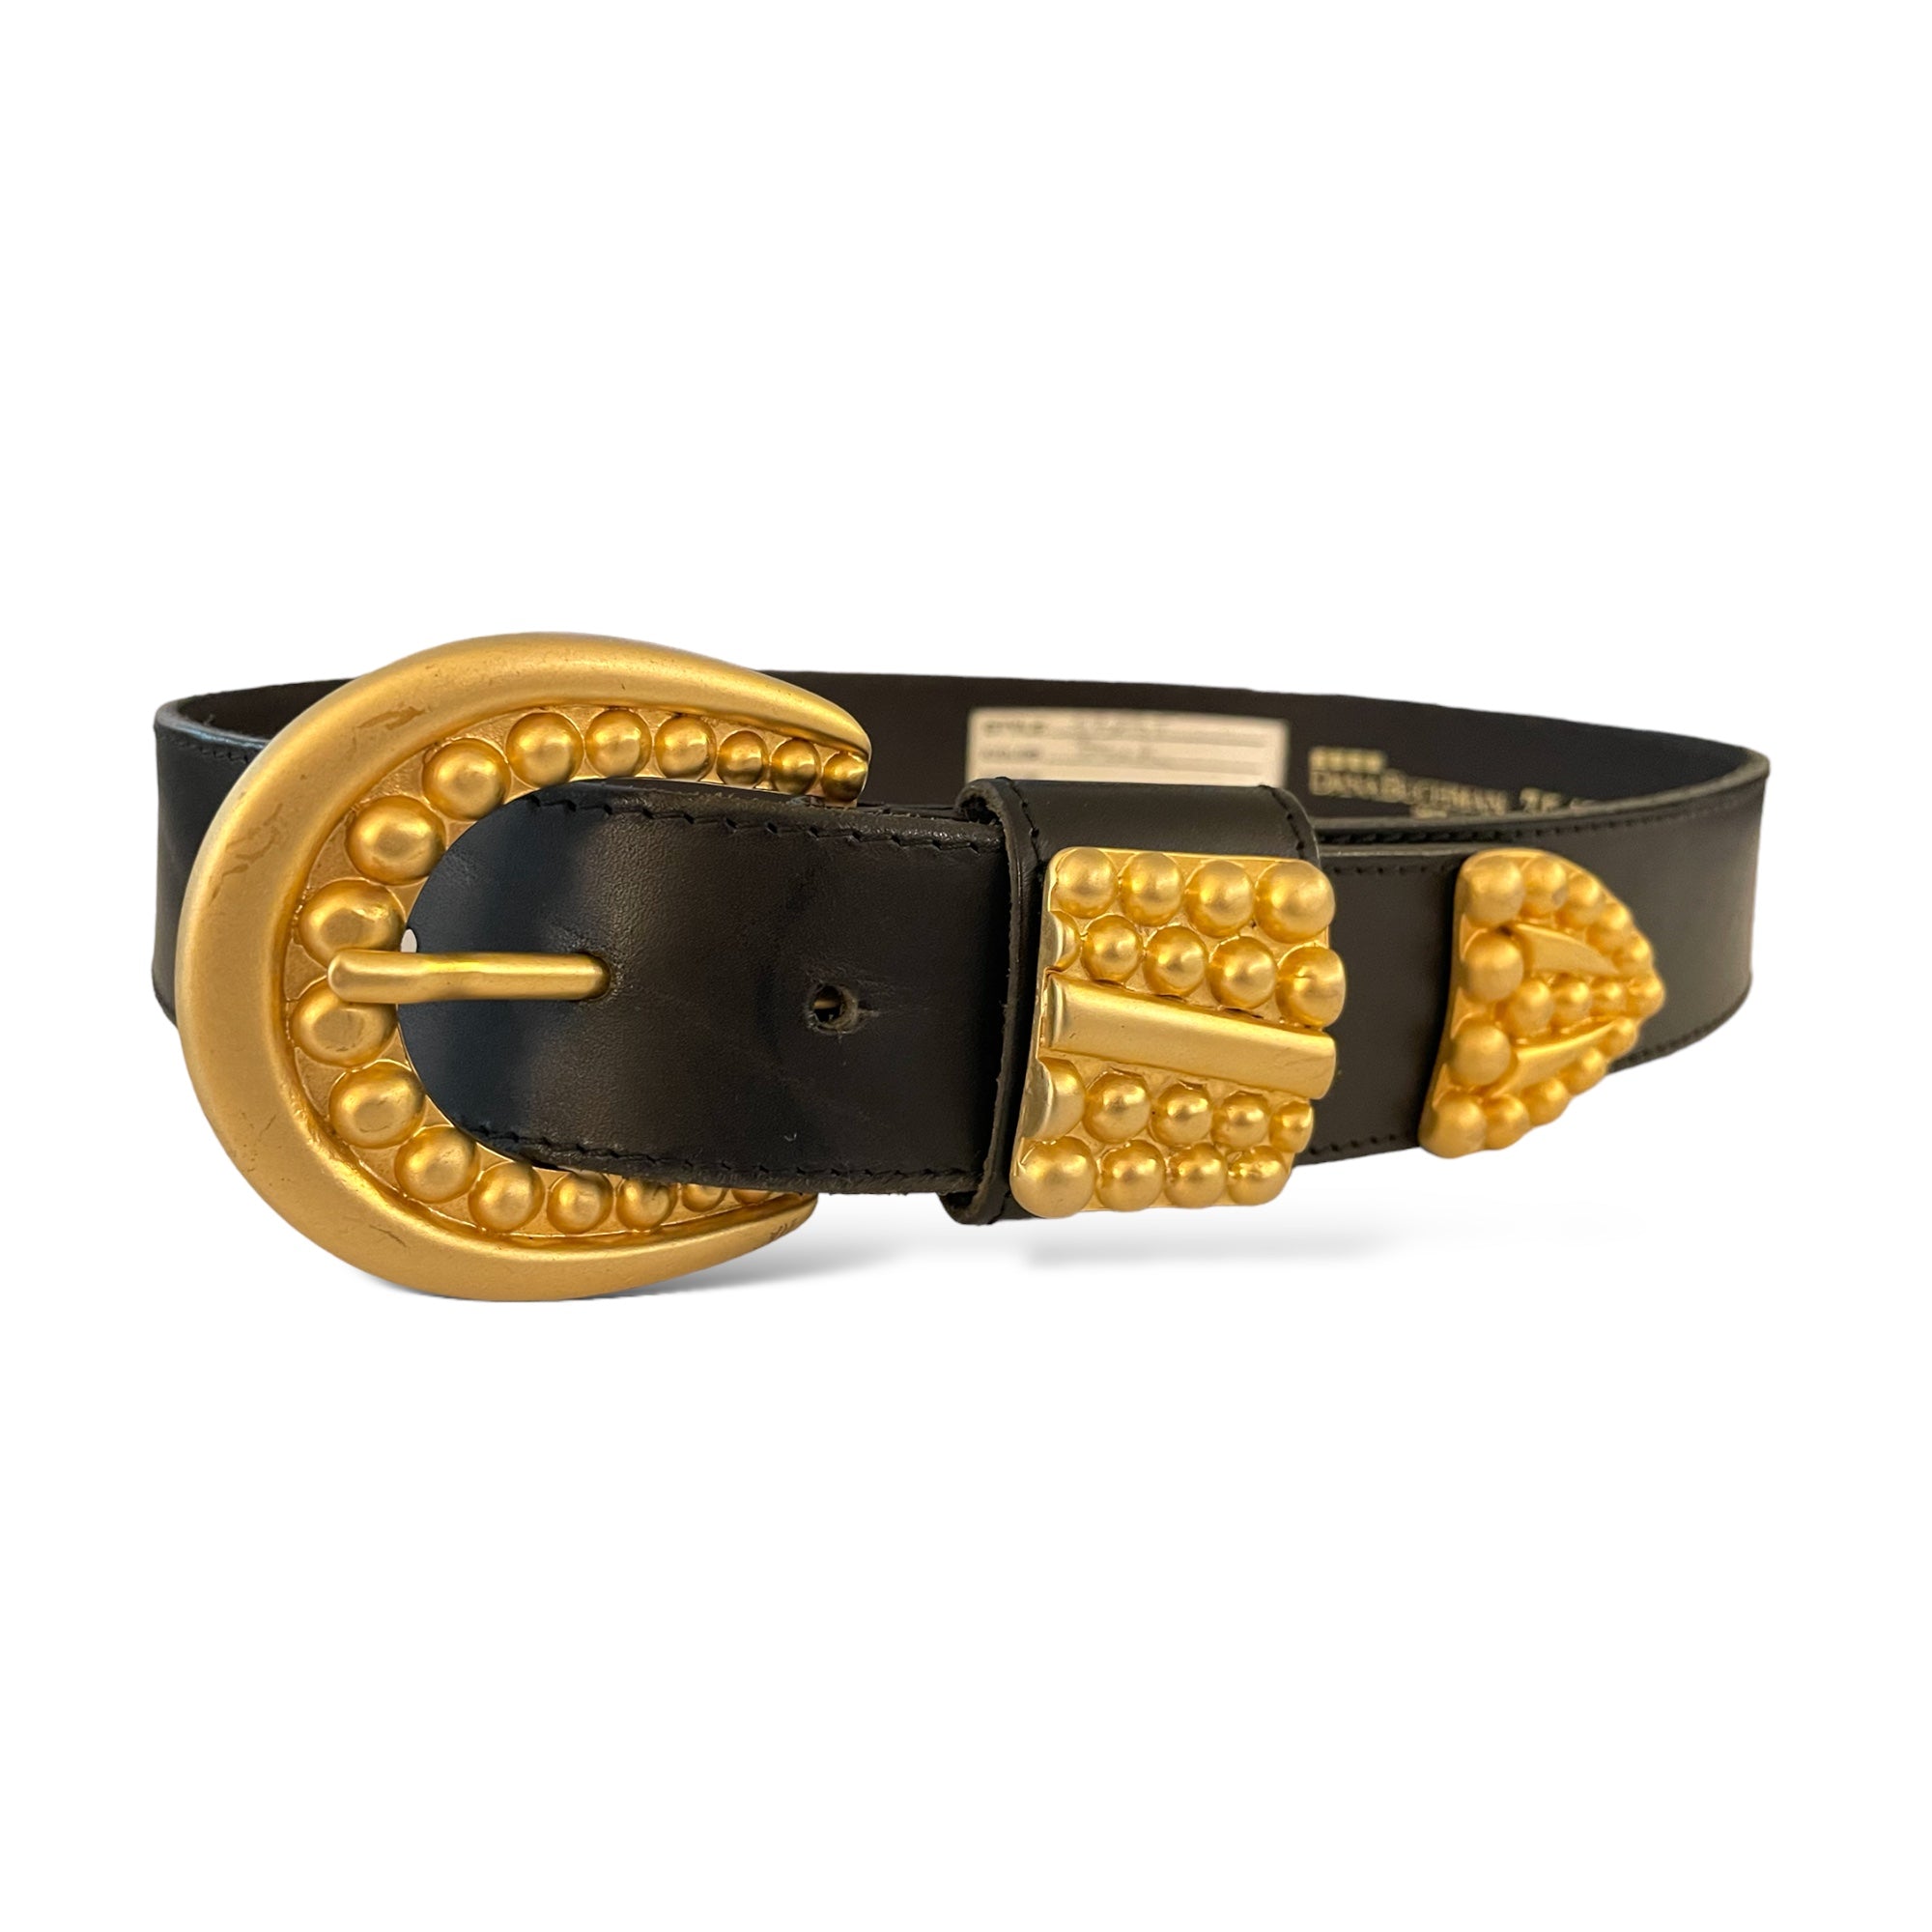 DANA BUCHMAN Made in Italy Black Leather Belt with Brushed Gold Buckle